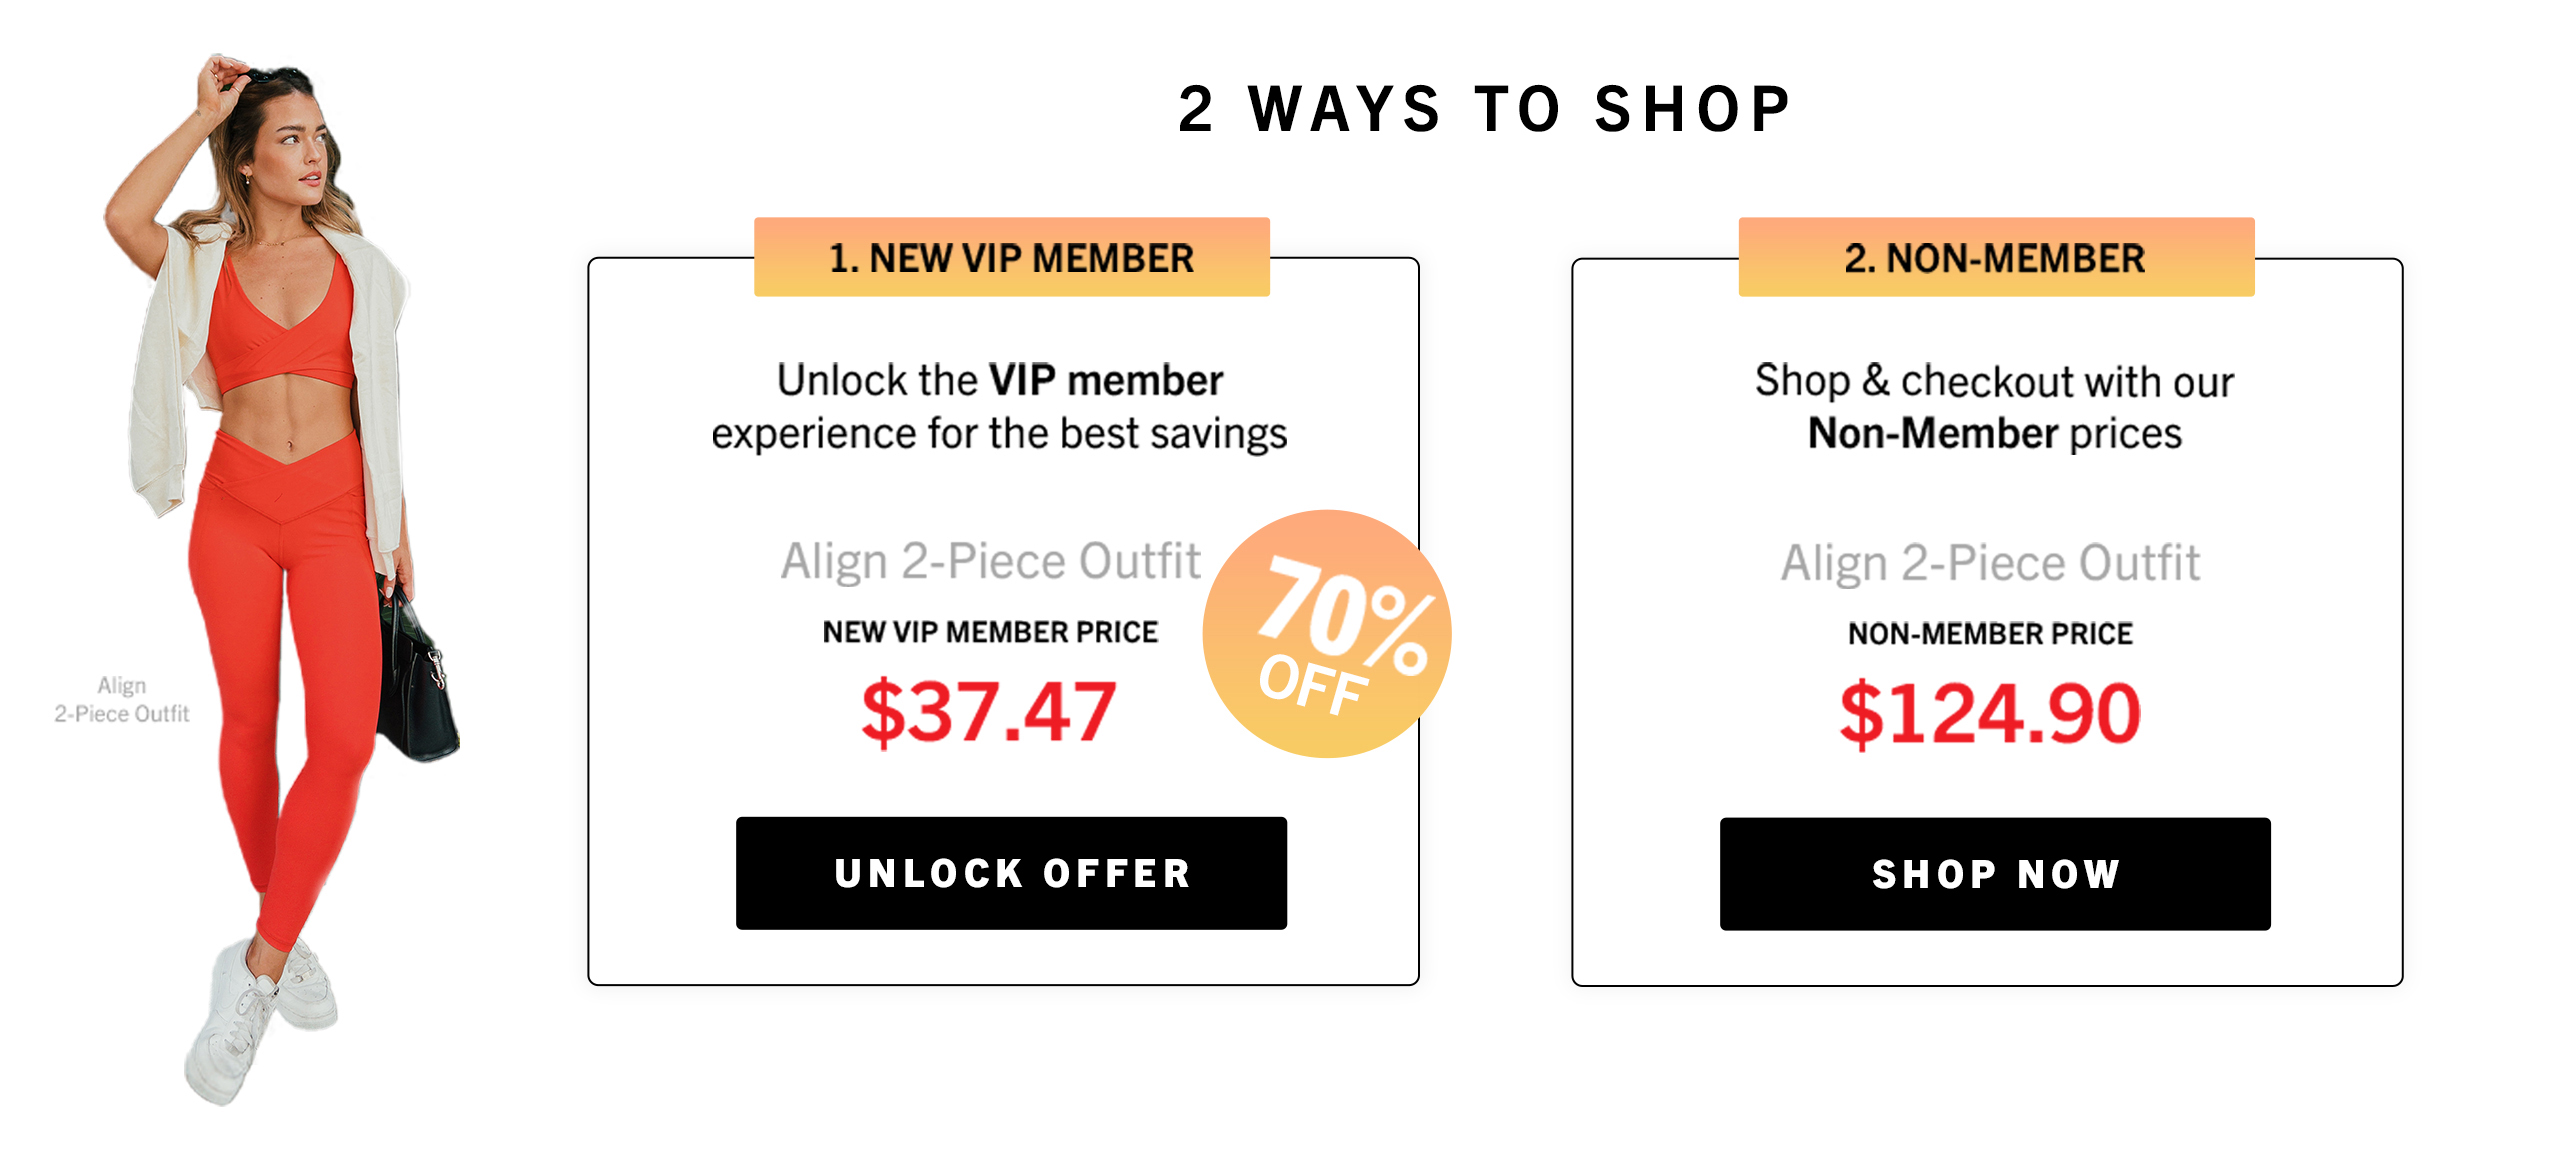 There's two ways to shop with us, unlock the VIP member experience for the best savings or shop our non member prices